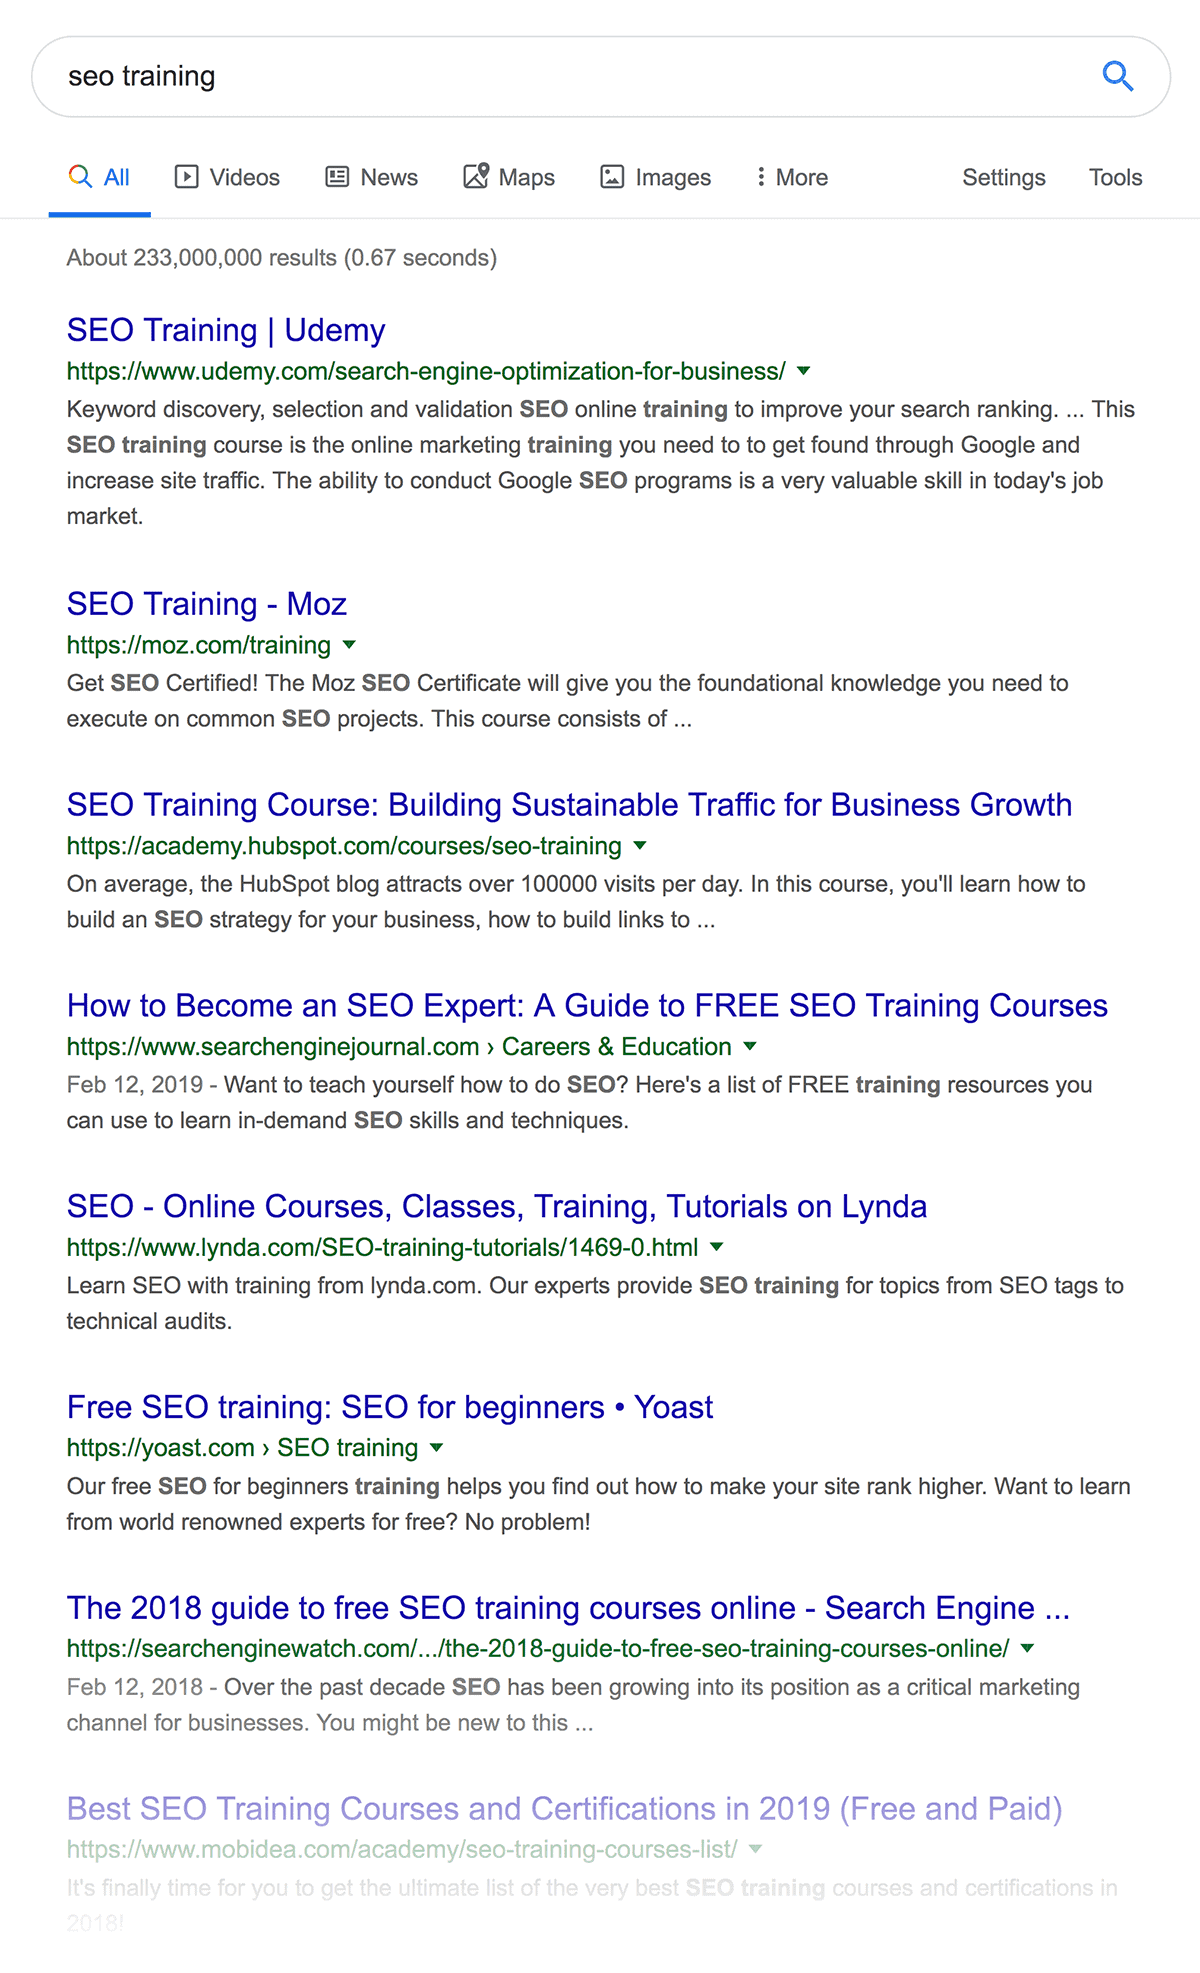 "seo training" search results